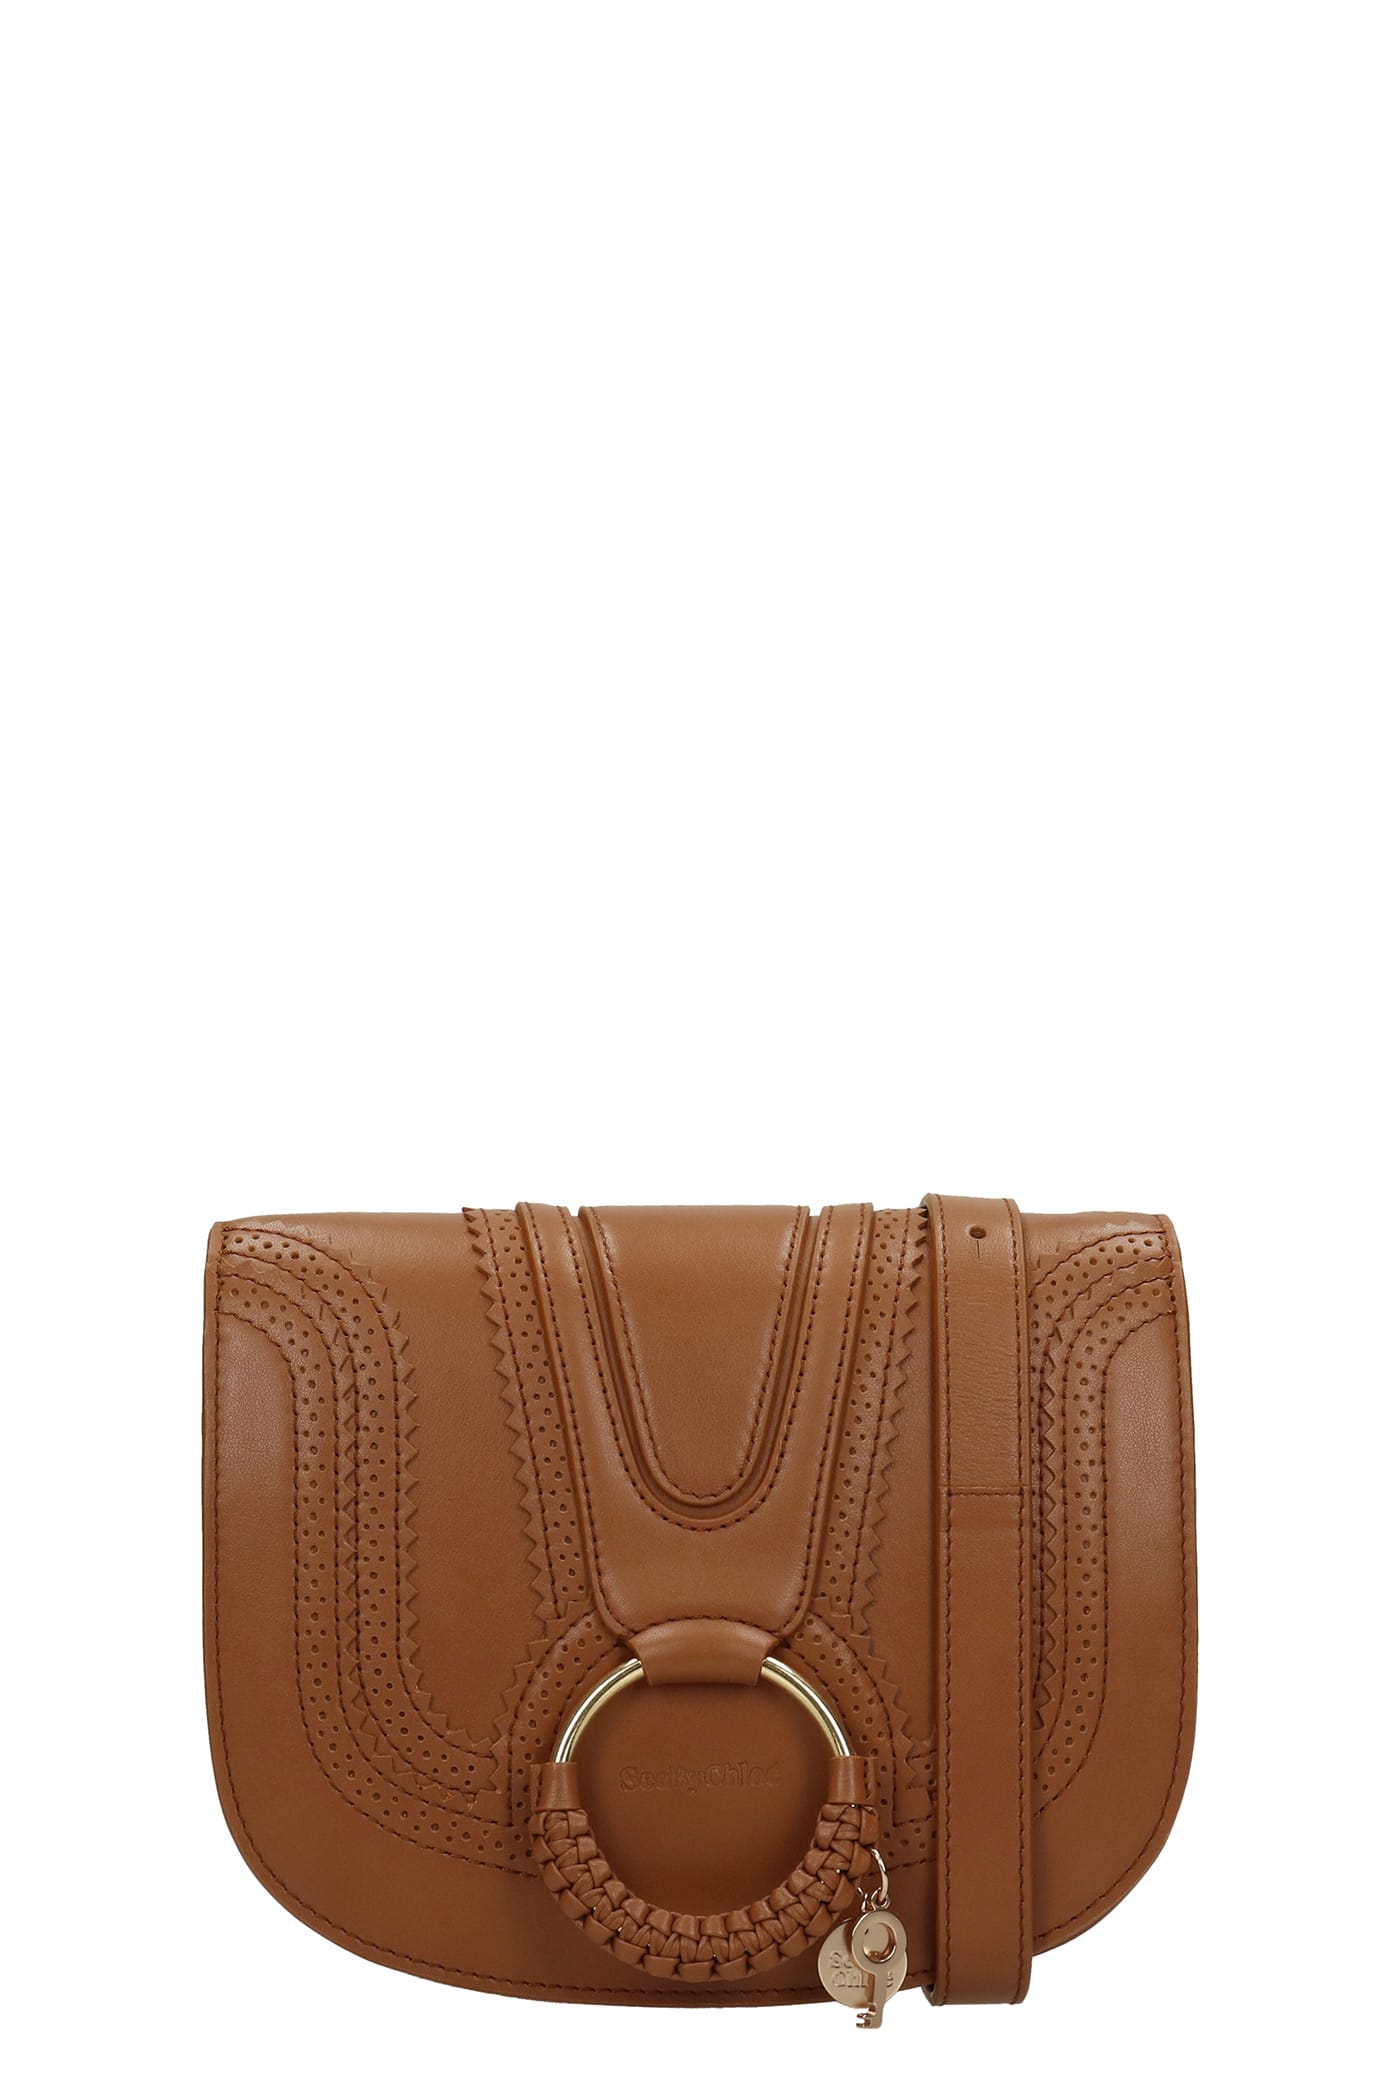 See by Chloé Hana Shoulder Bag In Leather Color Leather